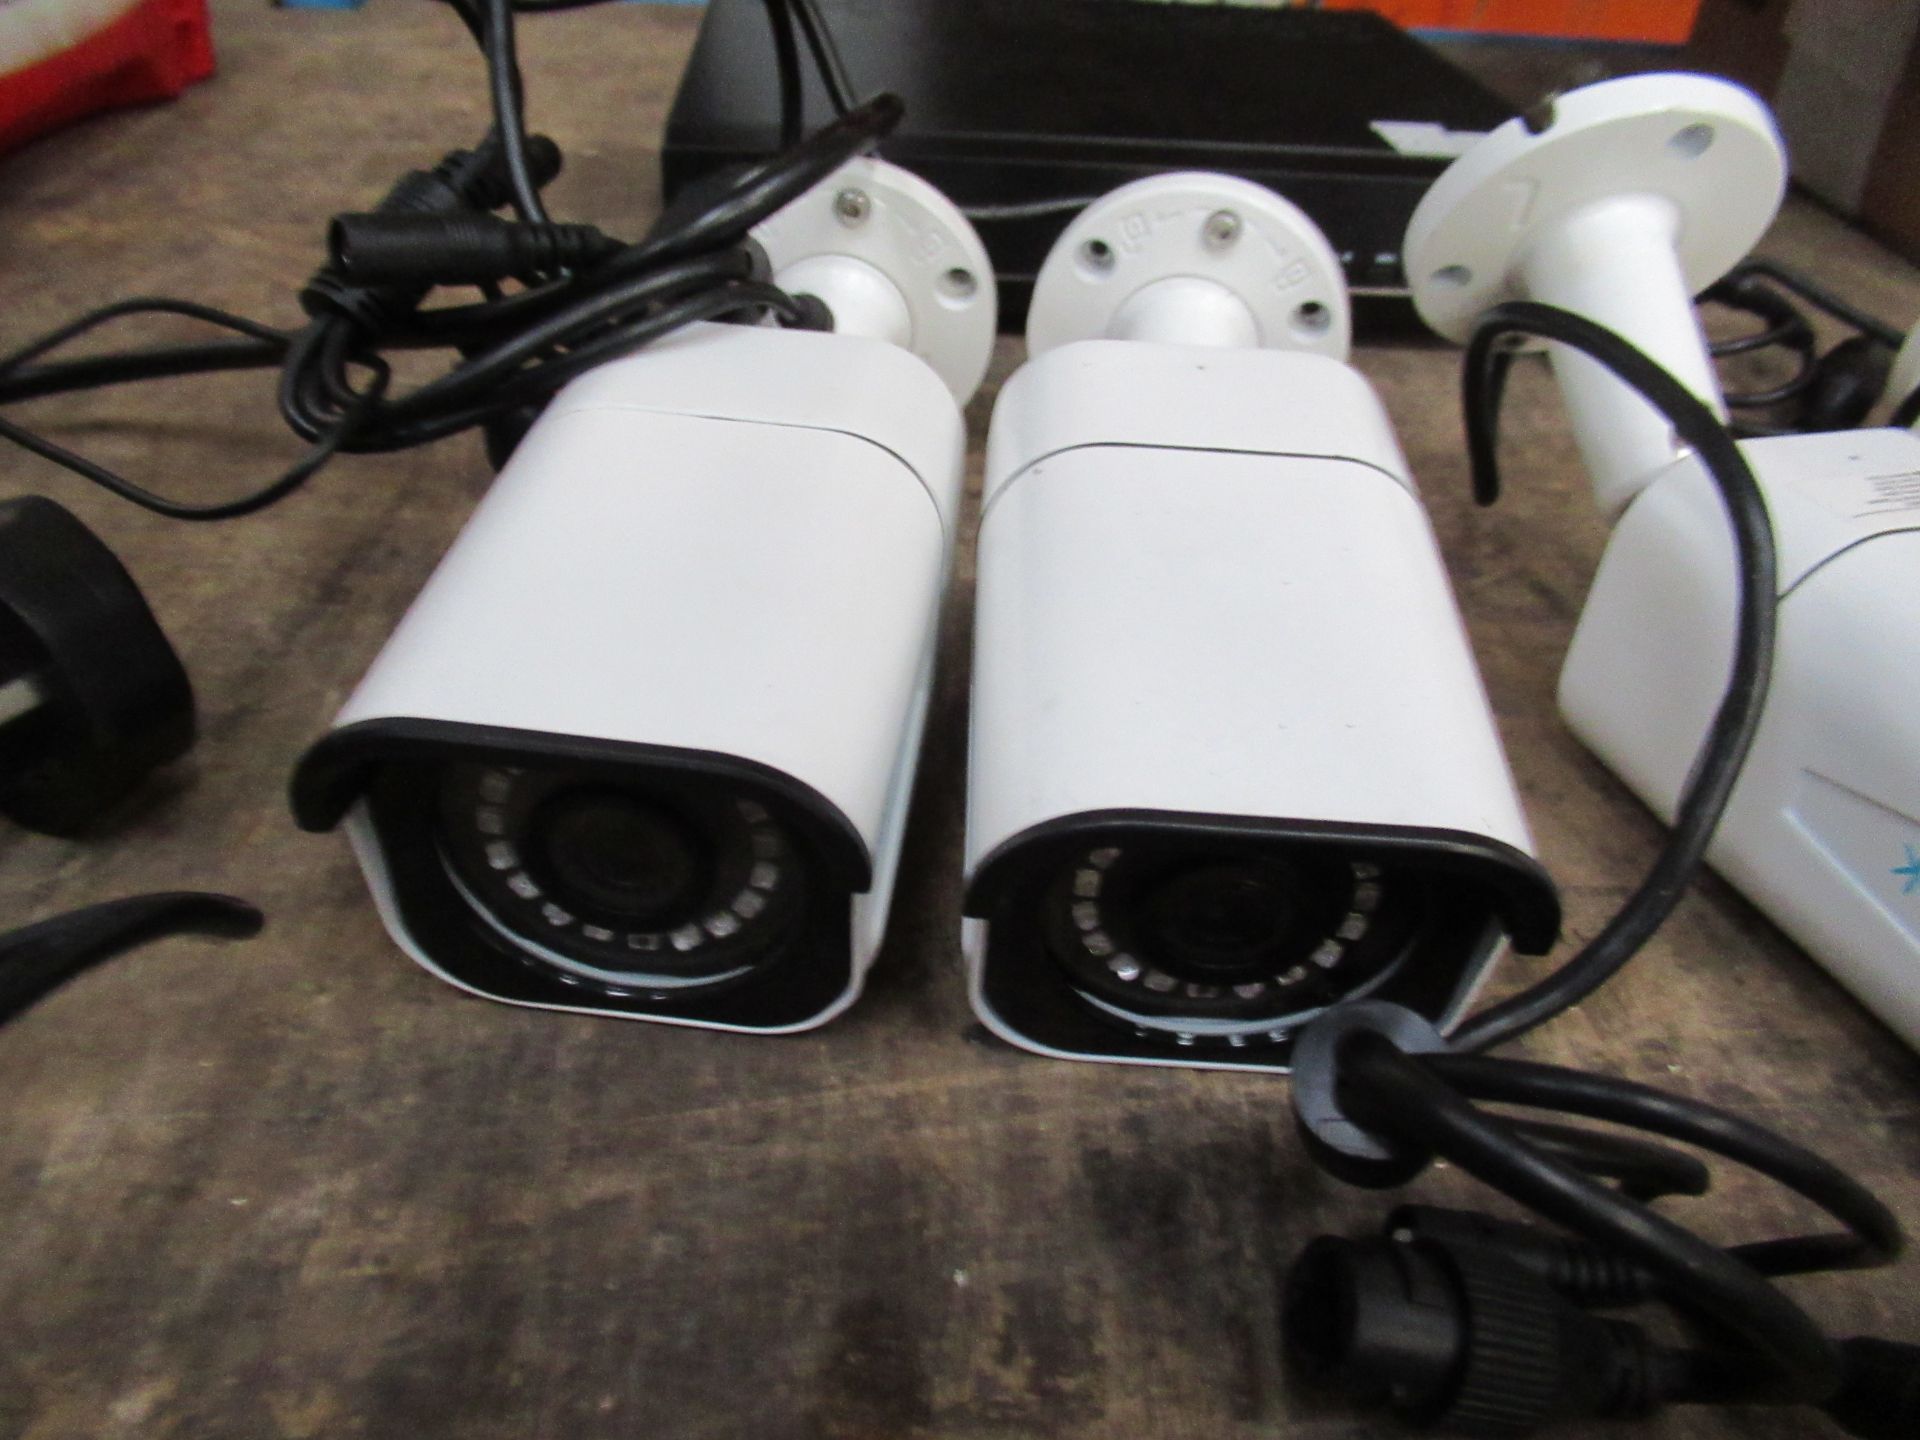 Redlink CCTV Recorder with 6 x cameras (condition unknown) - Image 3 of 7